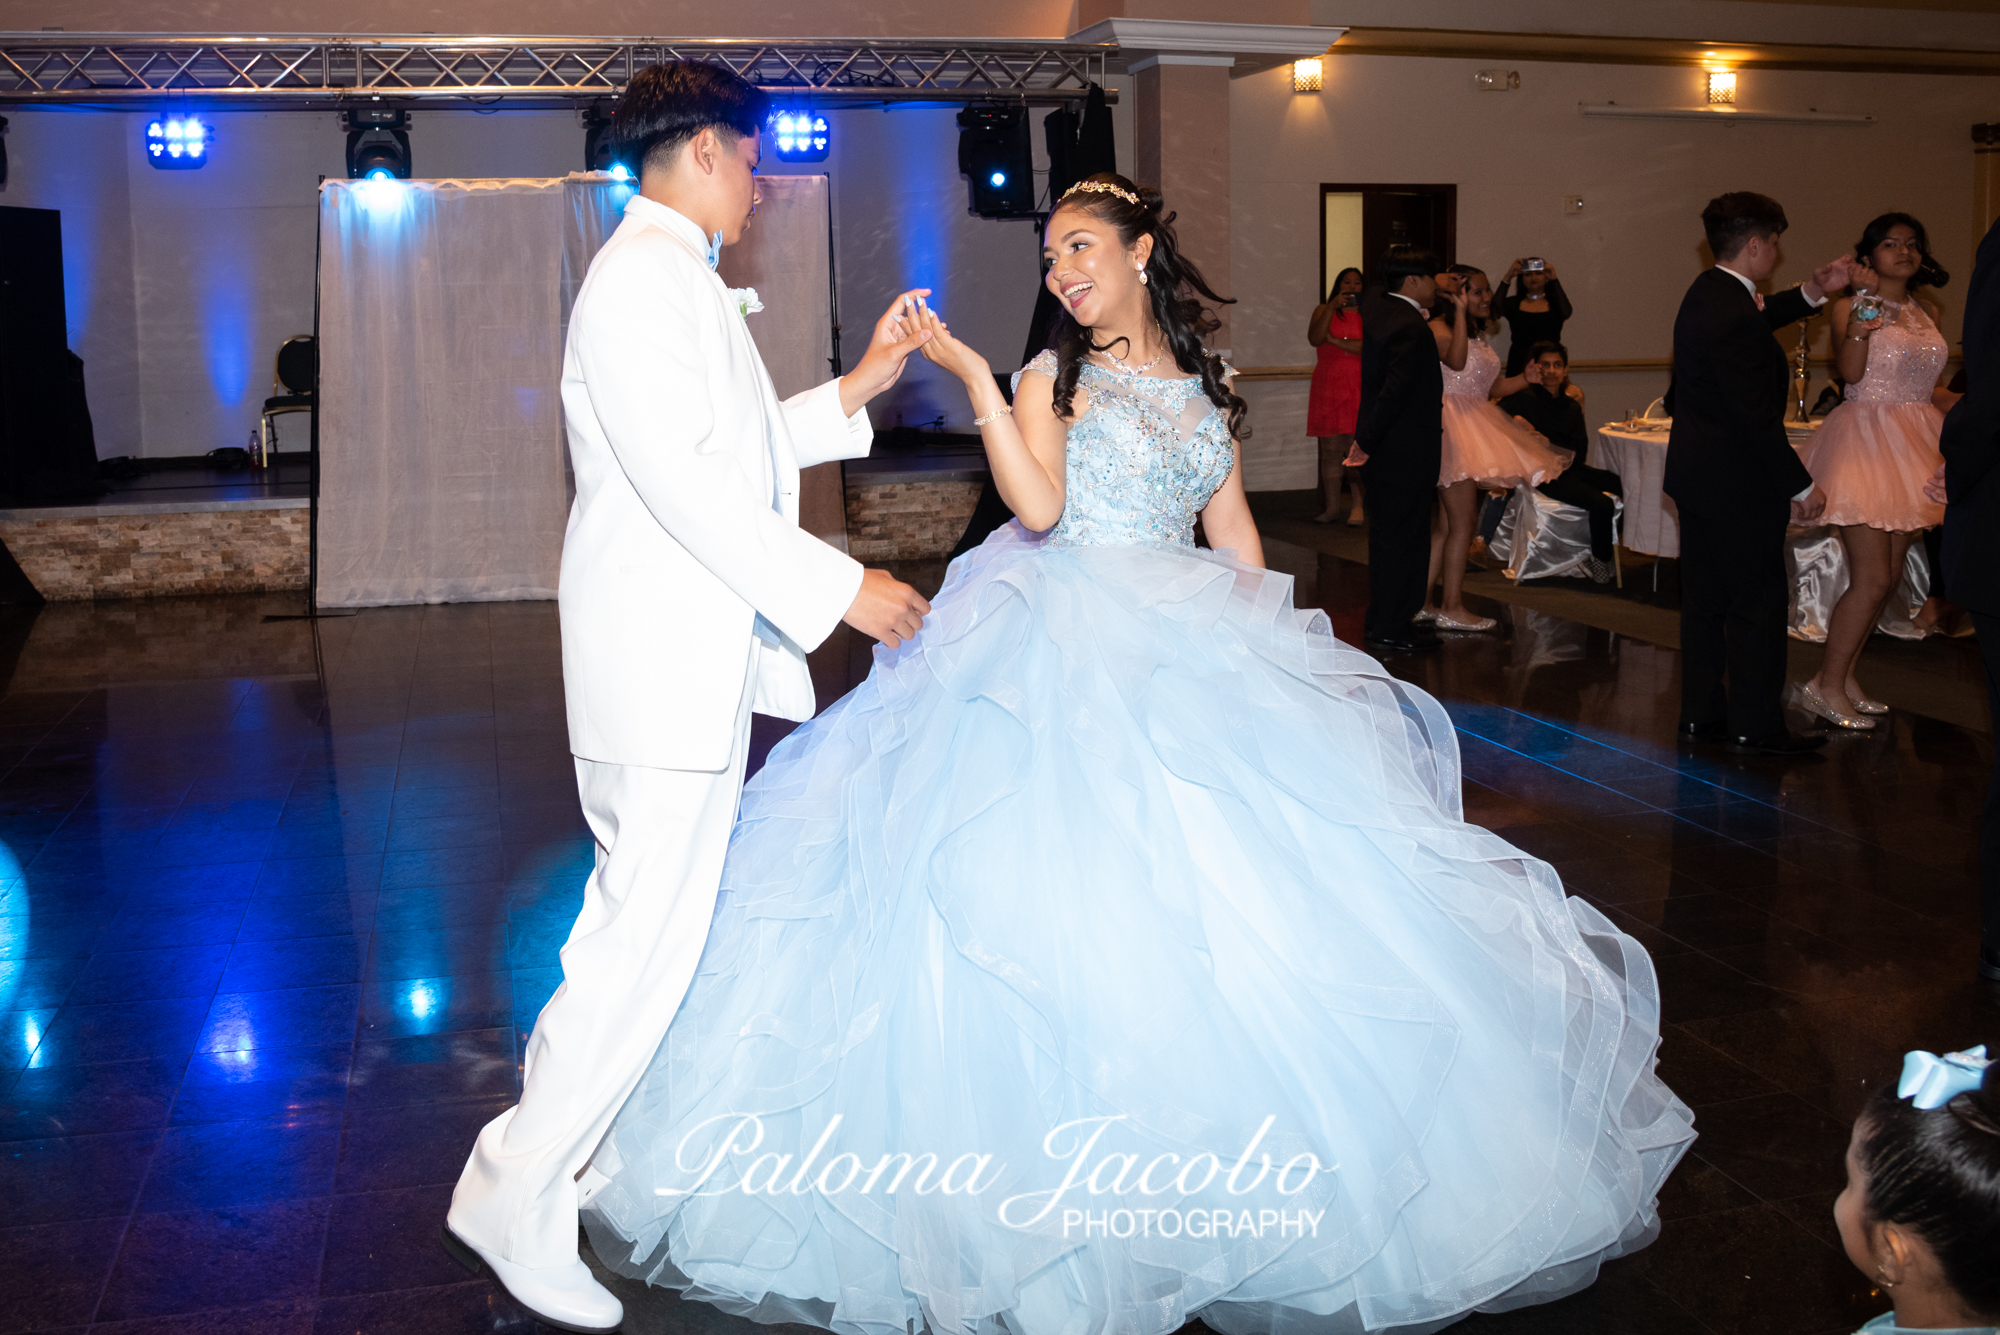 Quinceanera dancing Vals by Paloma Jacobo Photography